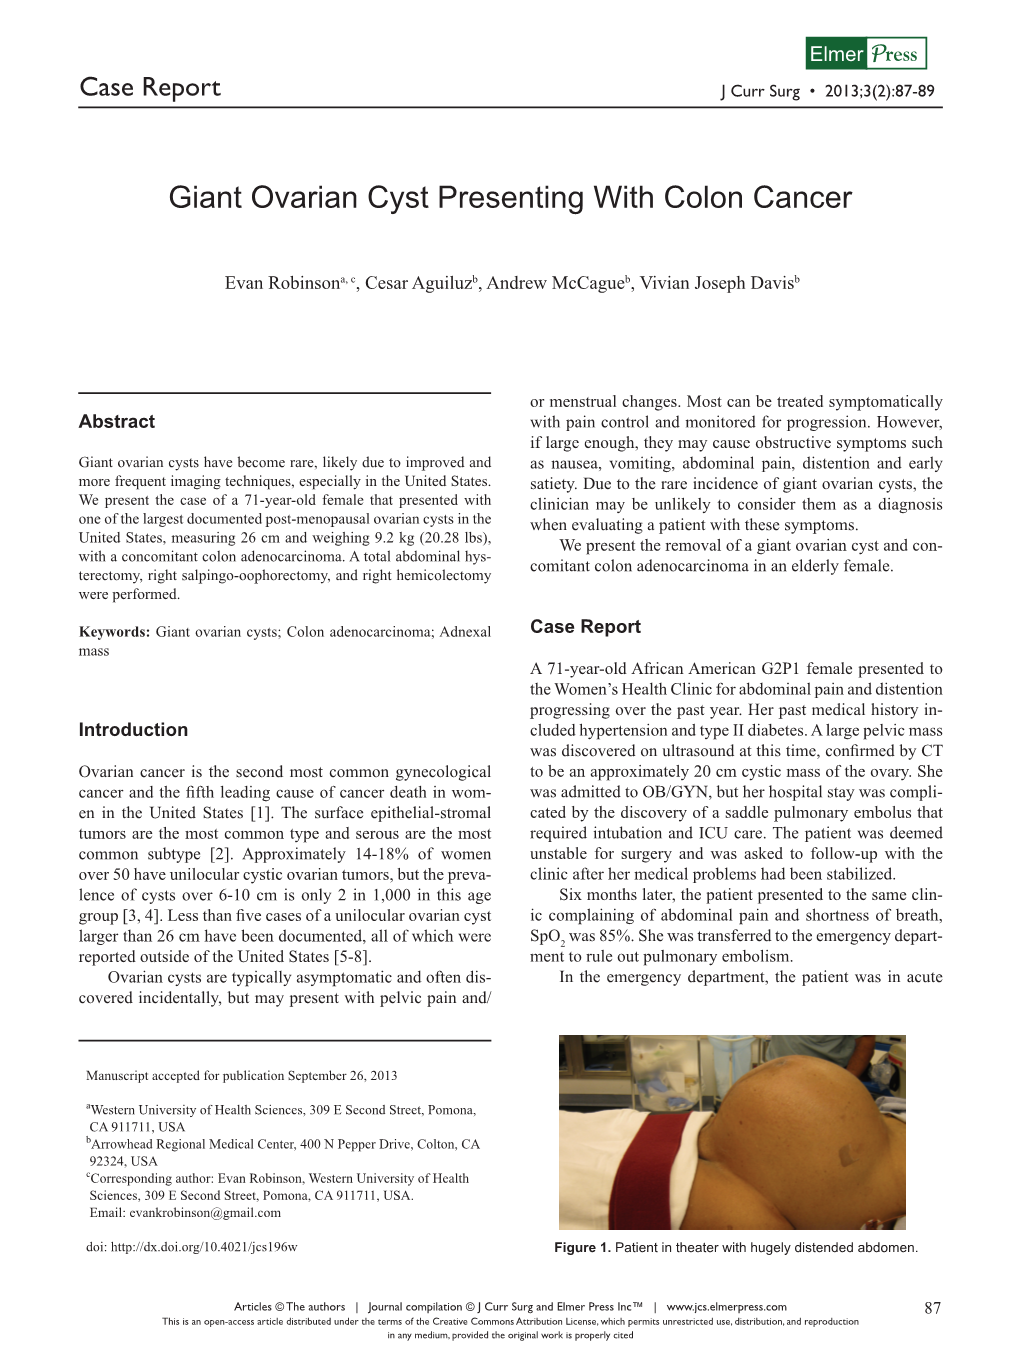 Giant Ovarian Cyst Presenting with Colon Cancer